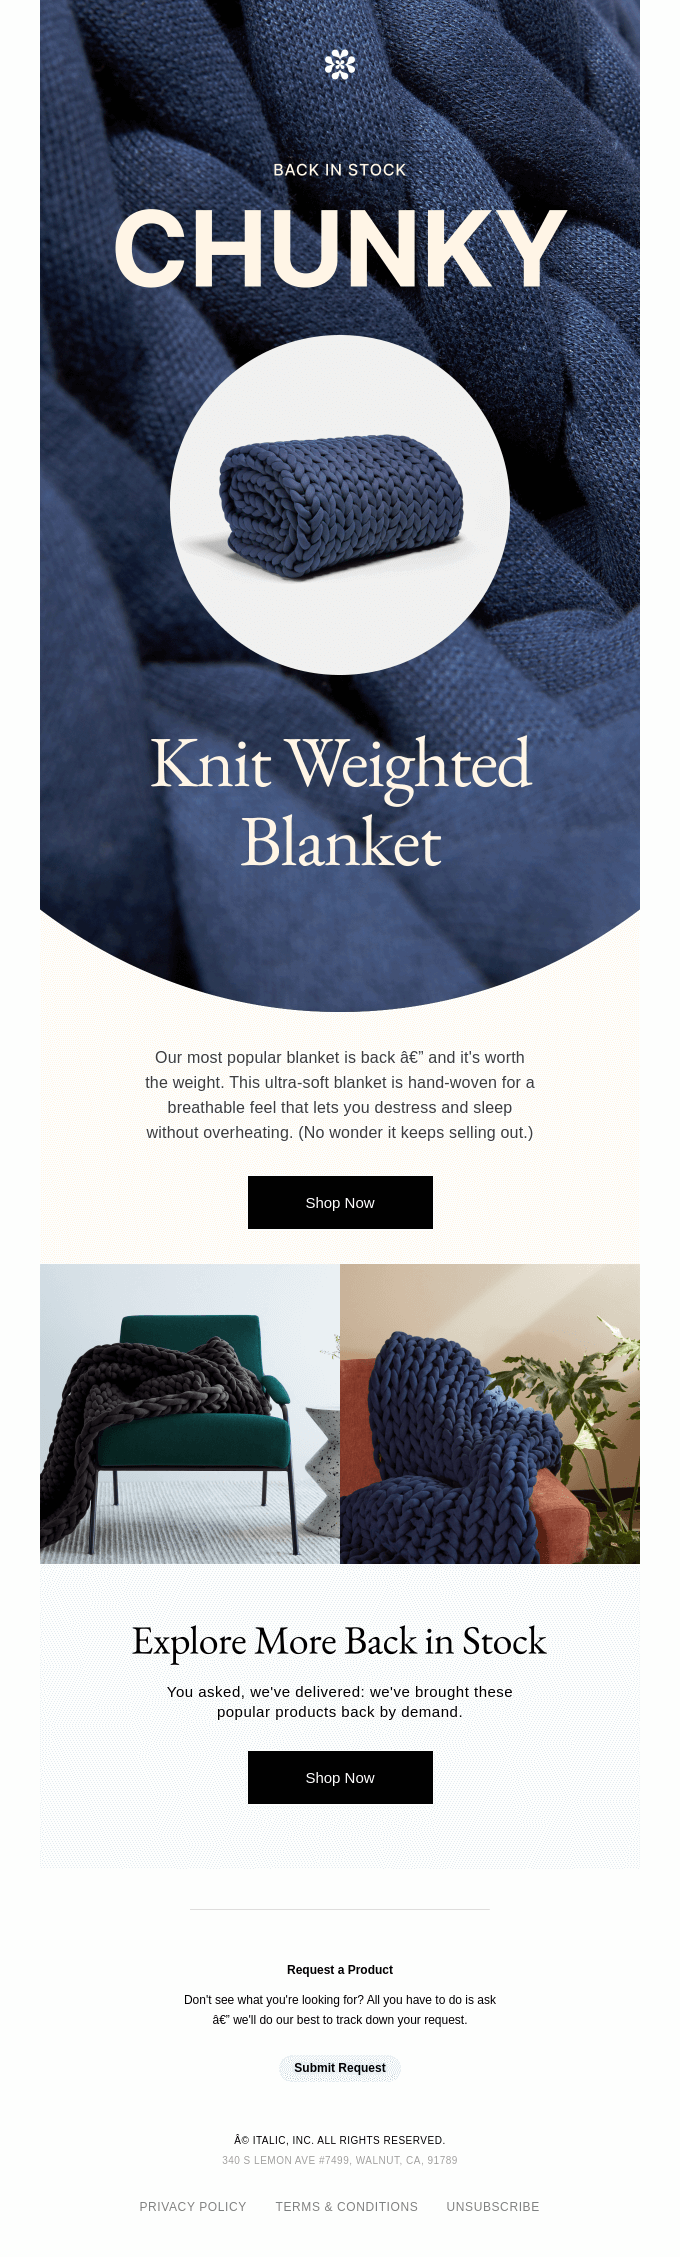 Our favorite blanket is back in stock